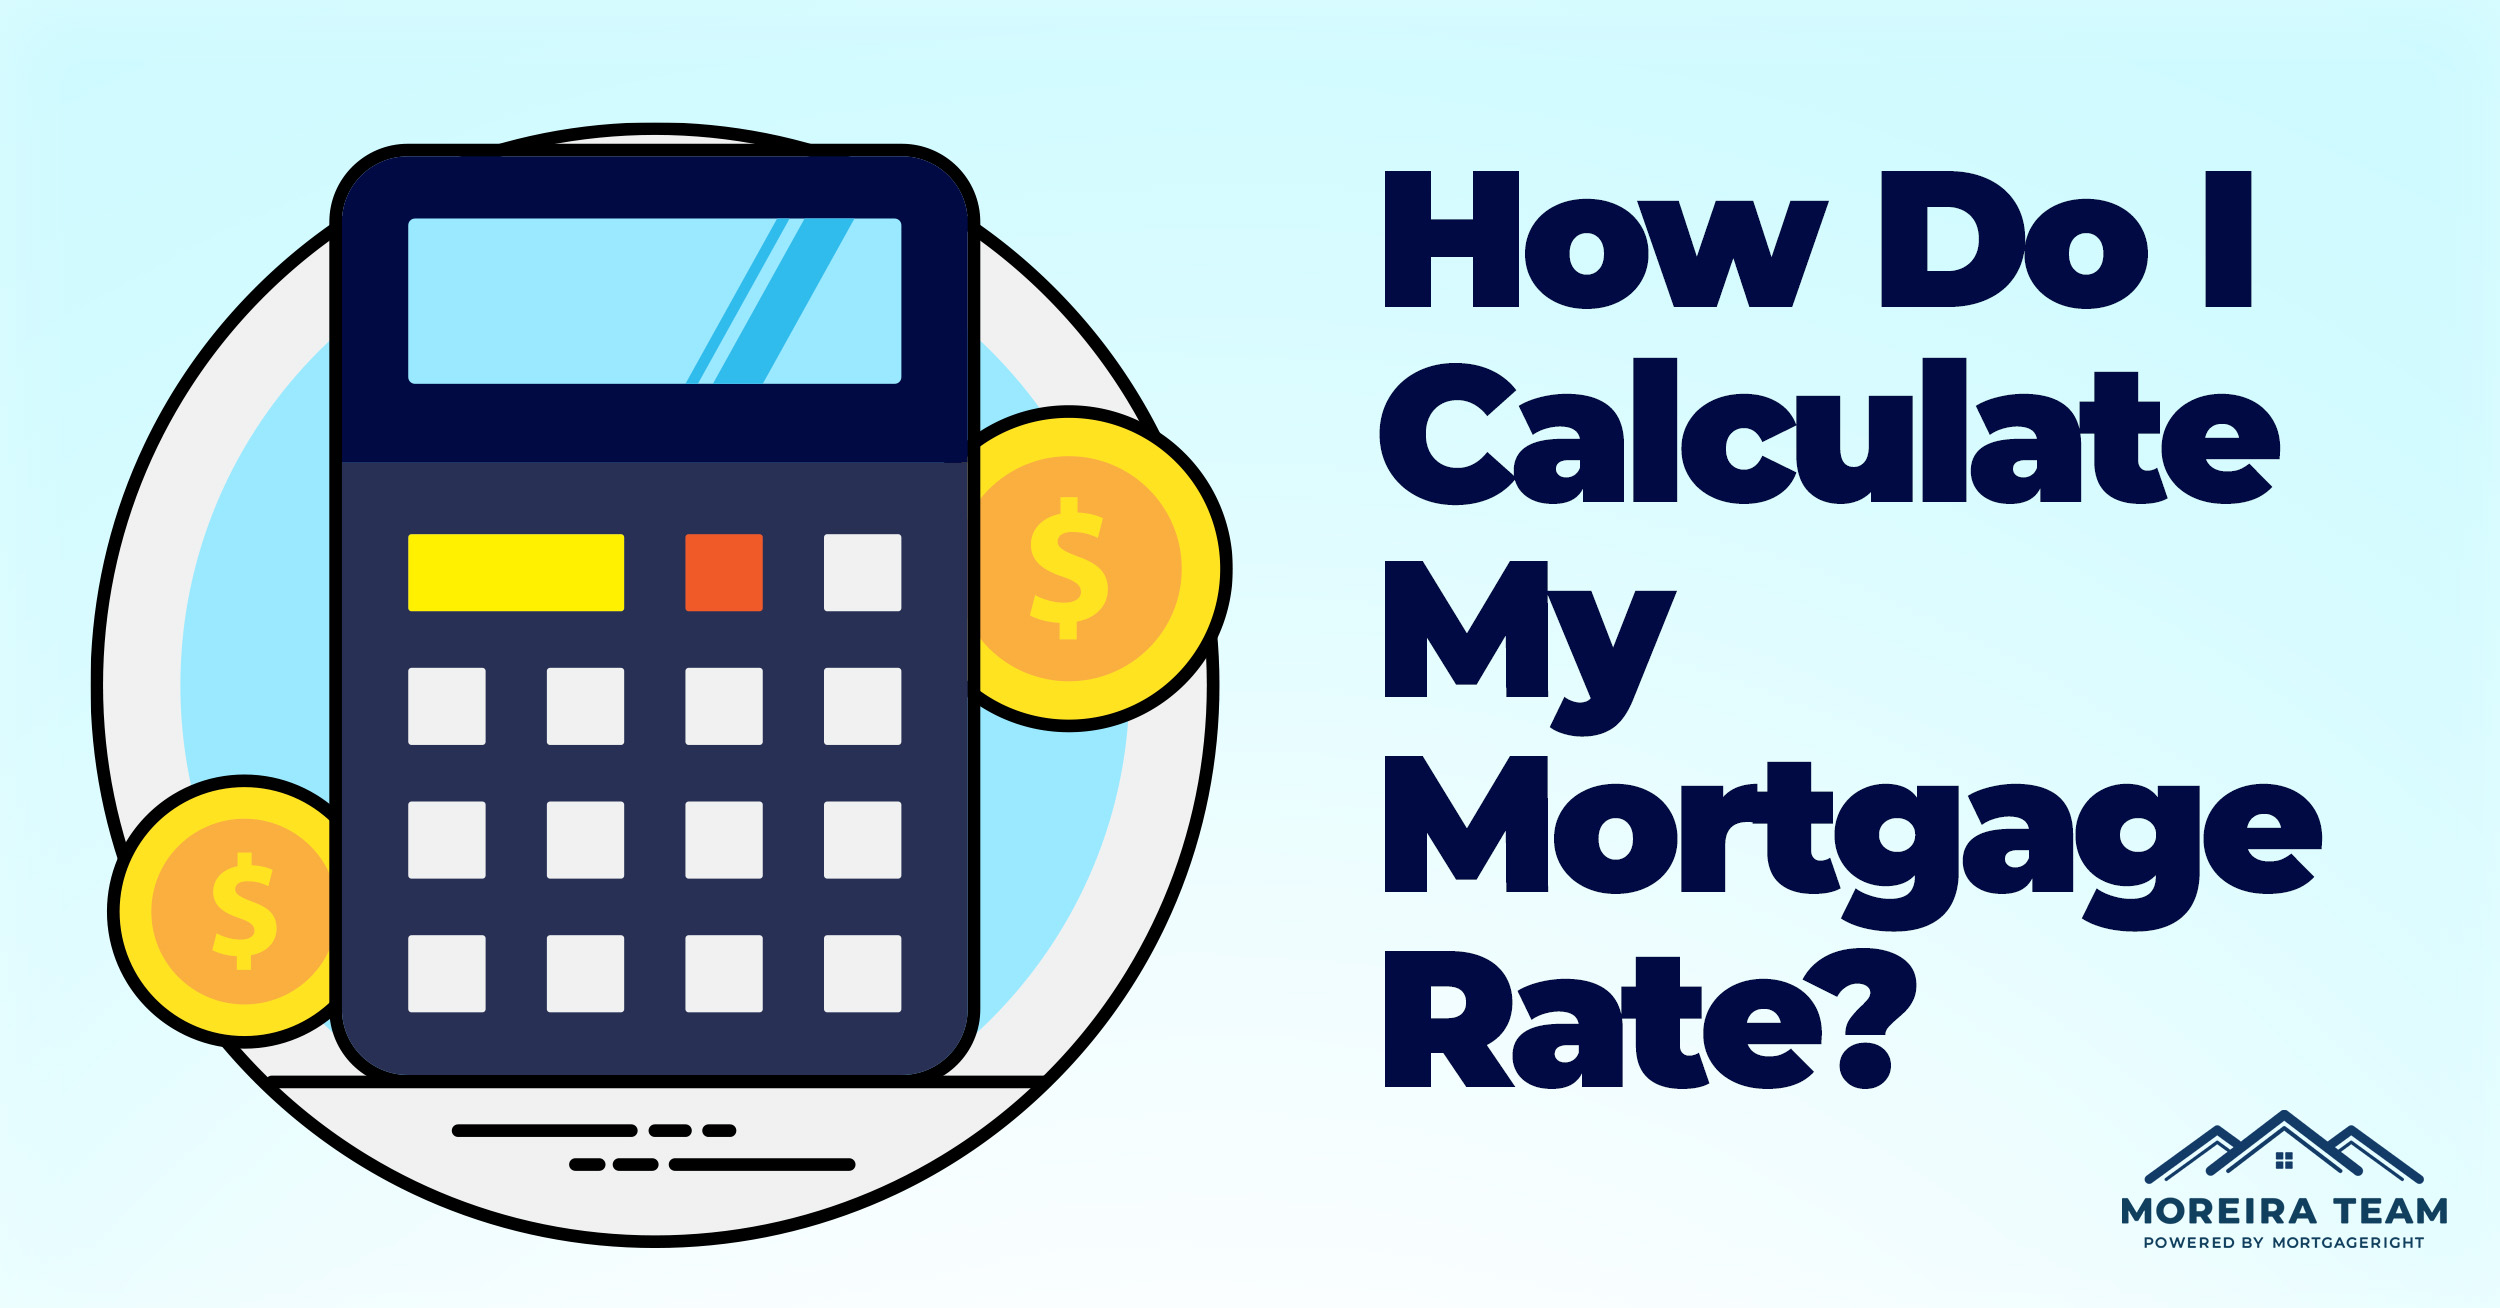 How Do I Calculate My Mortgage Rate?